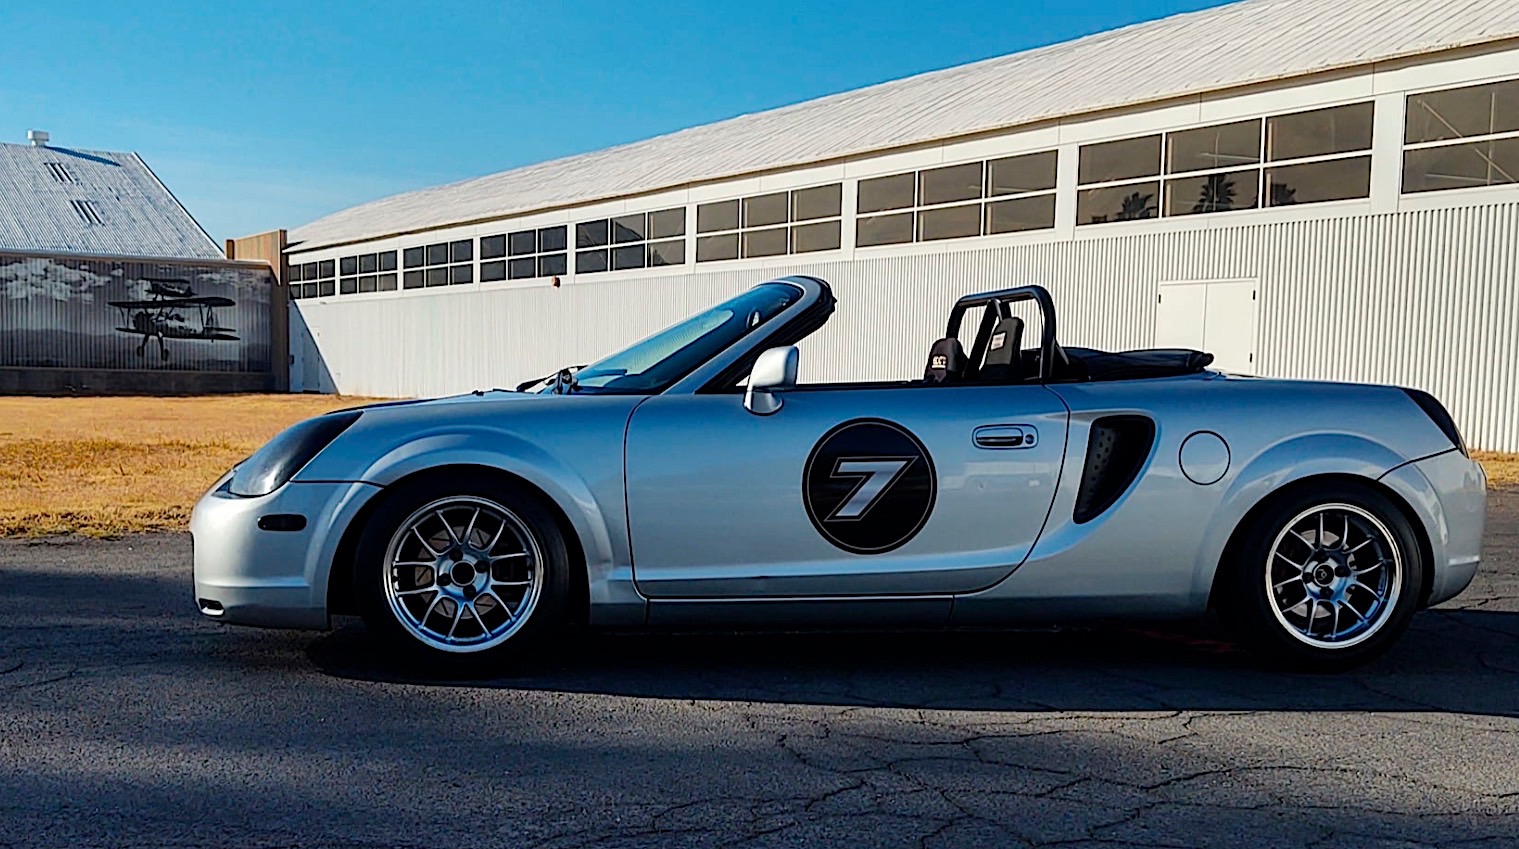 Track-Bred 2002 Toyota MR2 Spyder Looks Ready to Rumble - autoevolution